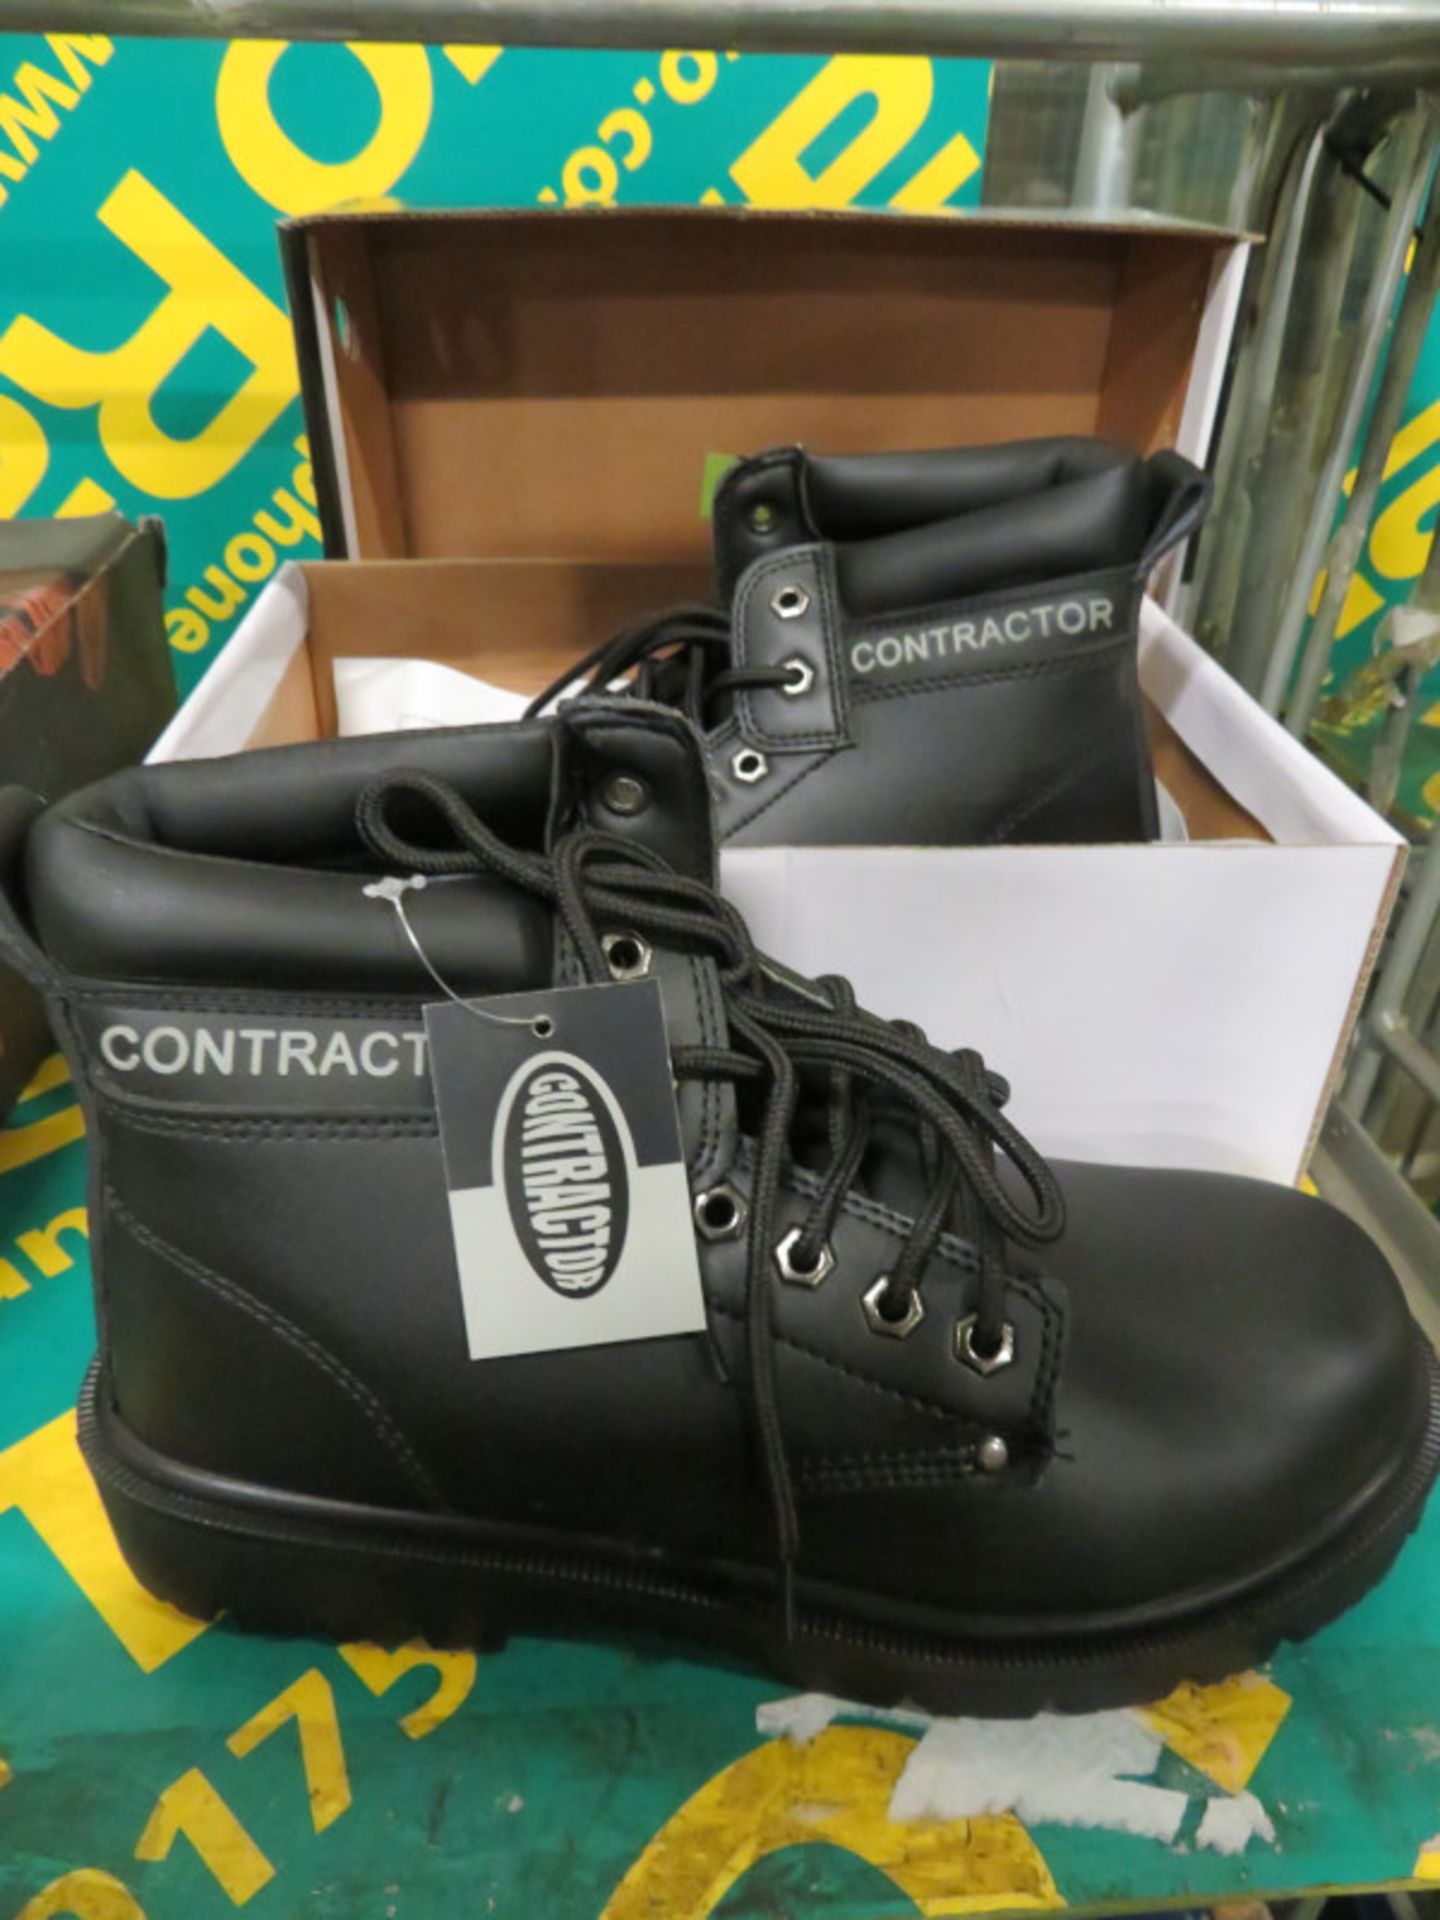 Contractor safety boot 802SM - 6UK 39euro - Image 2 of 2